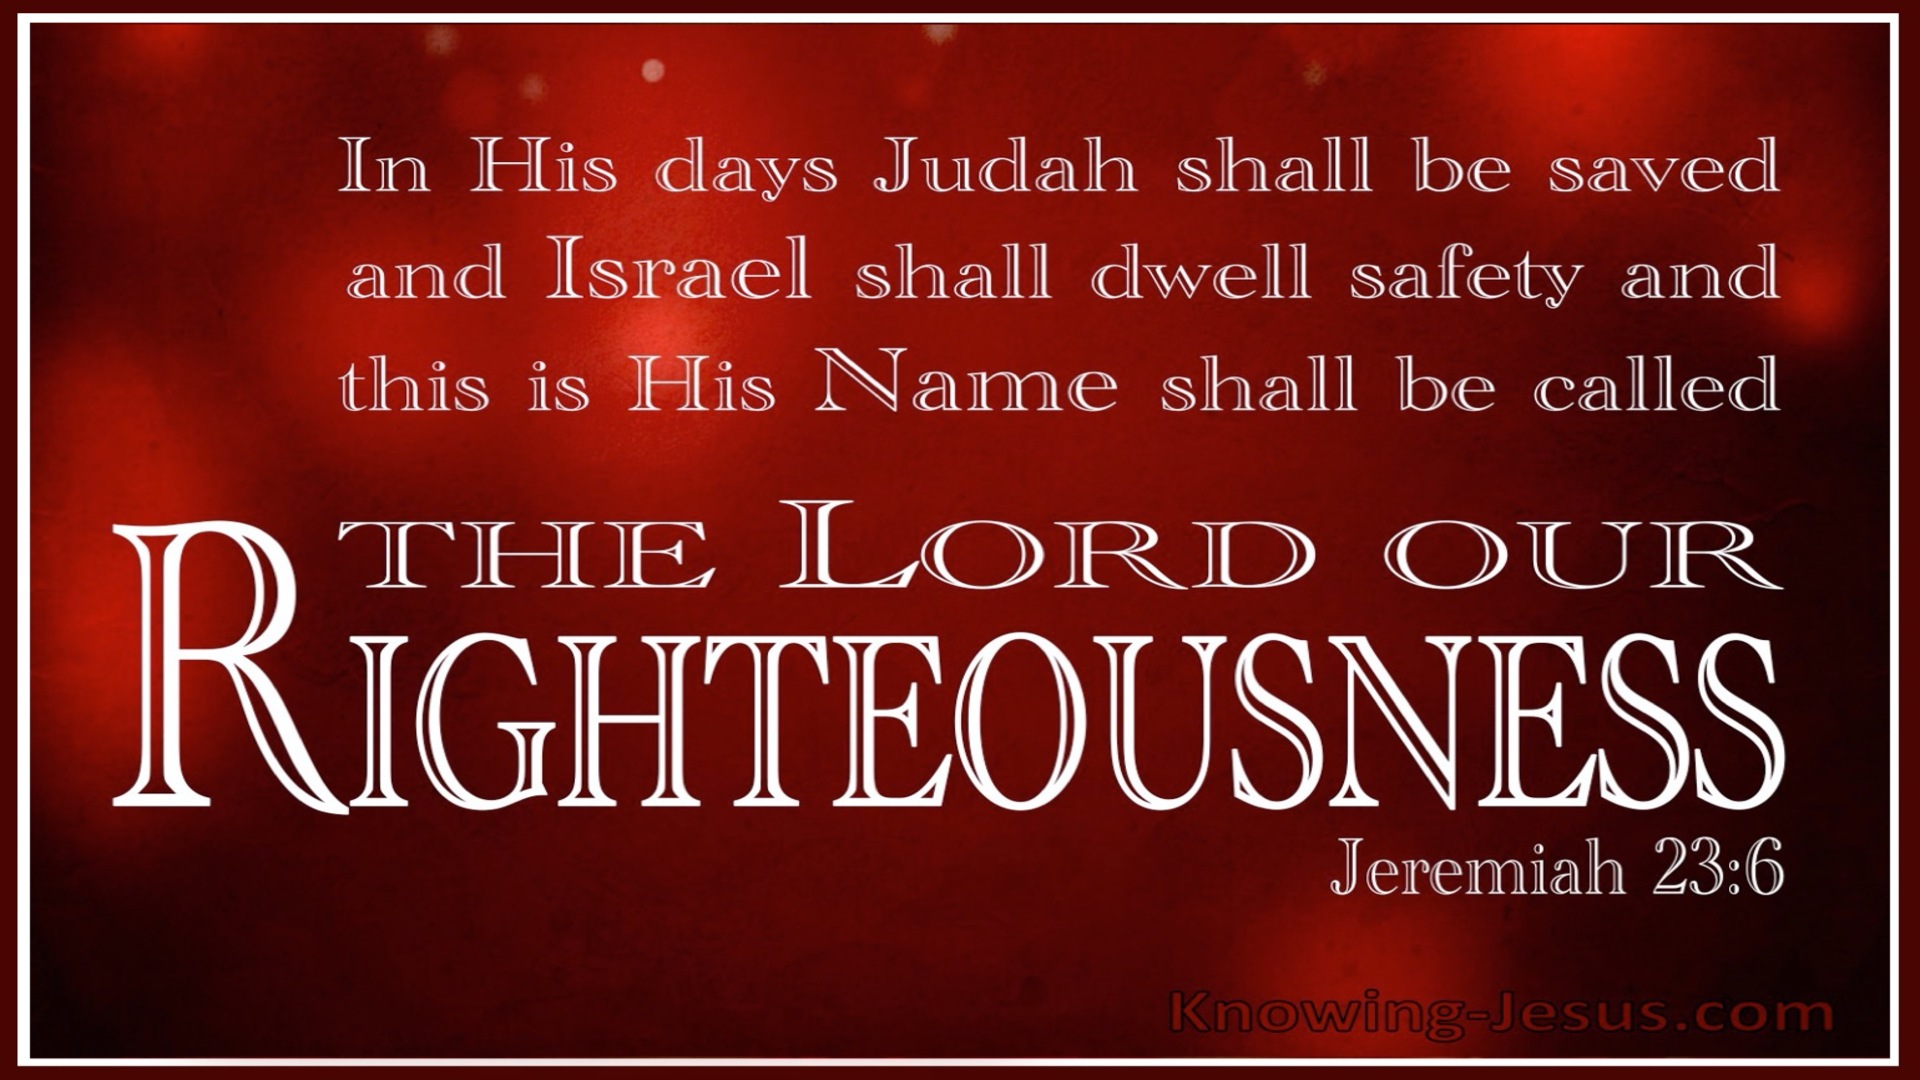 Jeremiah 23:6 The Lord Our Righteousness (white)